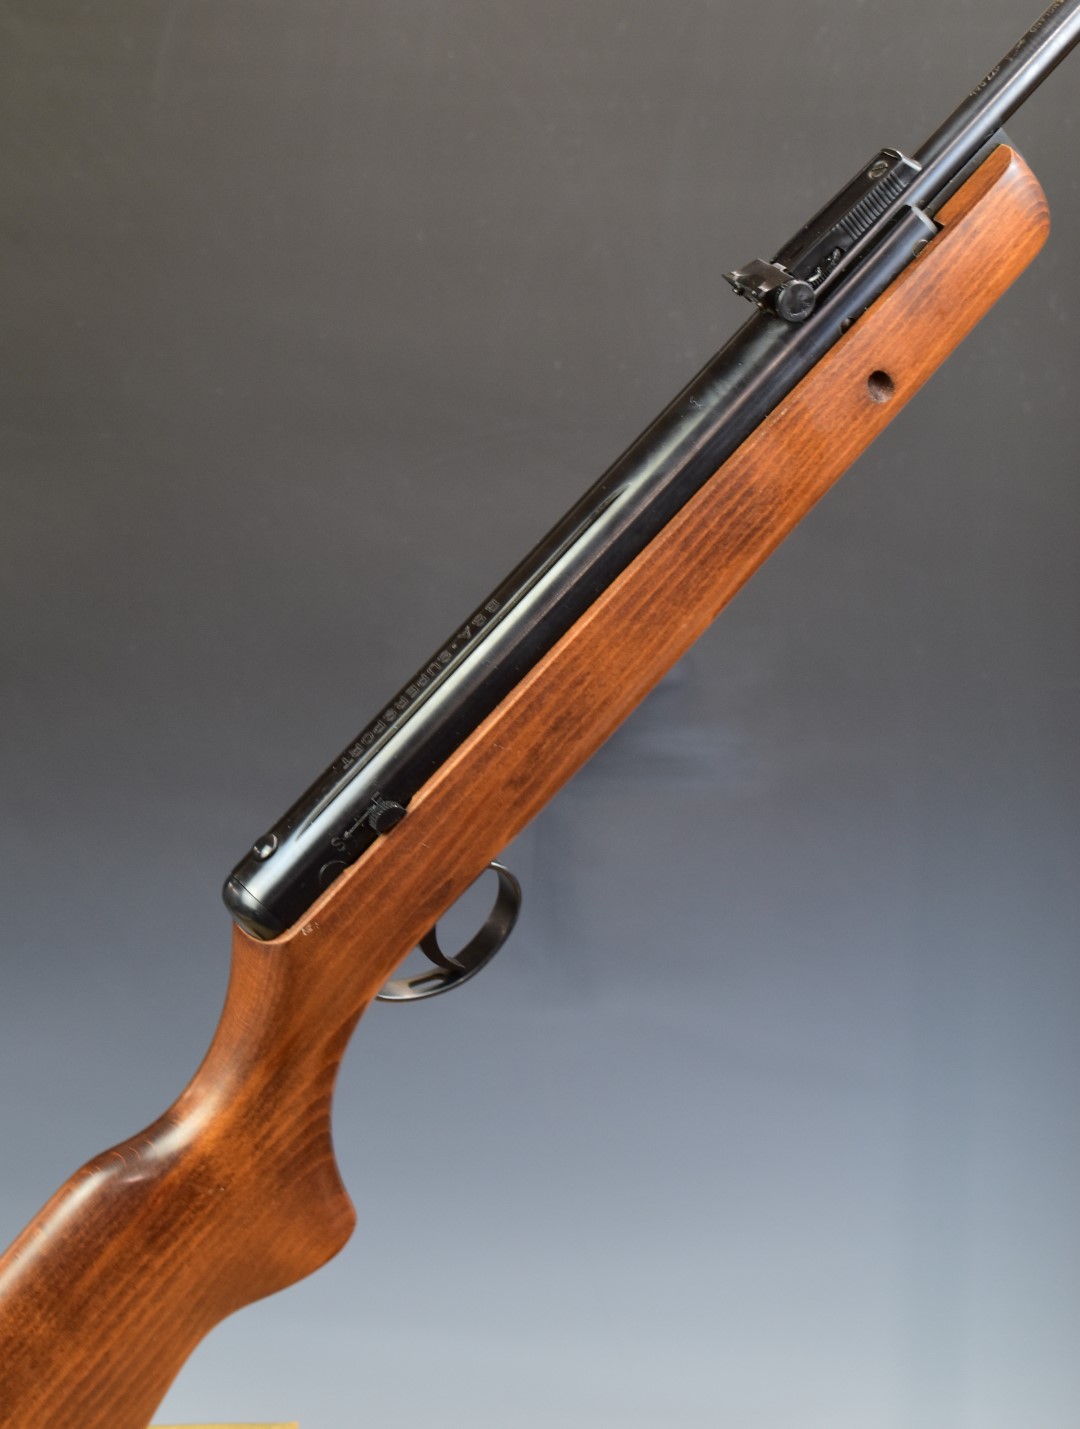 BSA Supersport .177 FAC air rifle with semi-pistol grip and adjustable sights, serial number